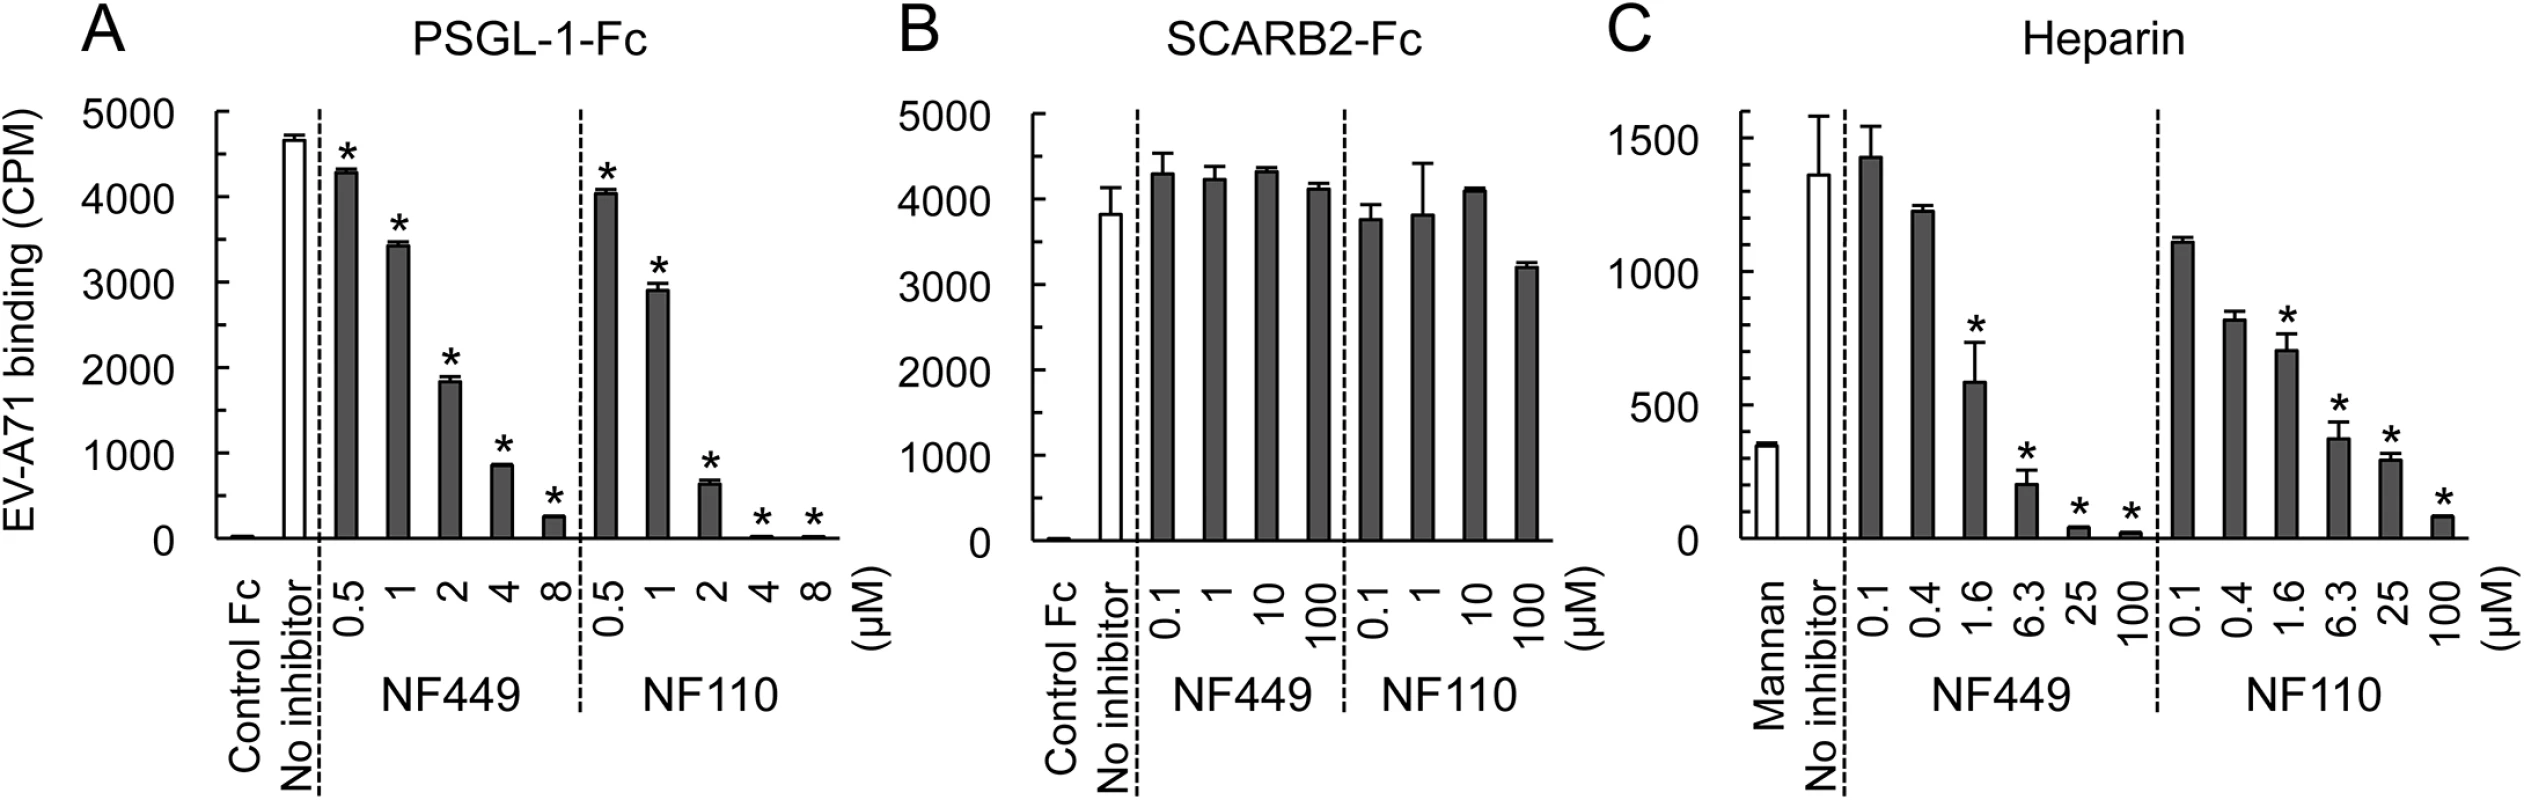 NF449 and NF110 inhibit EV-A71 attachment to PSGL-1 and heparin, but not SCARB2.